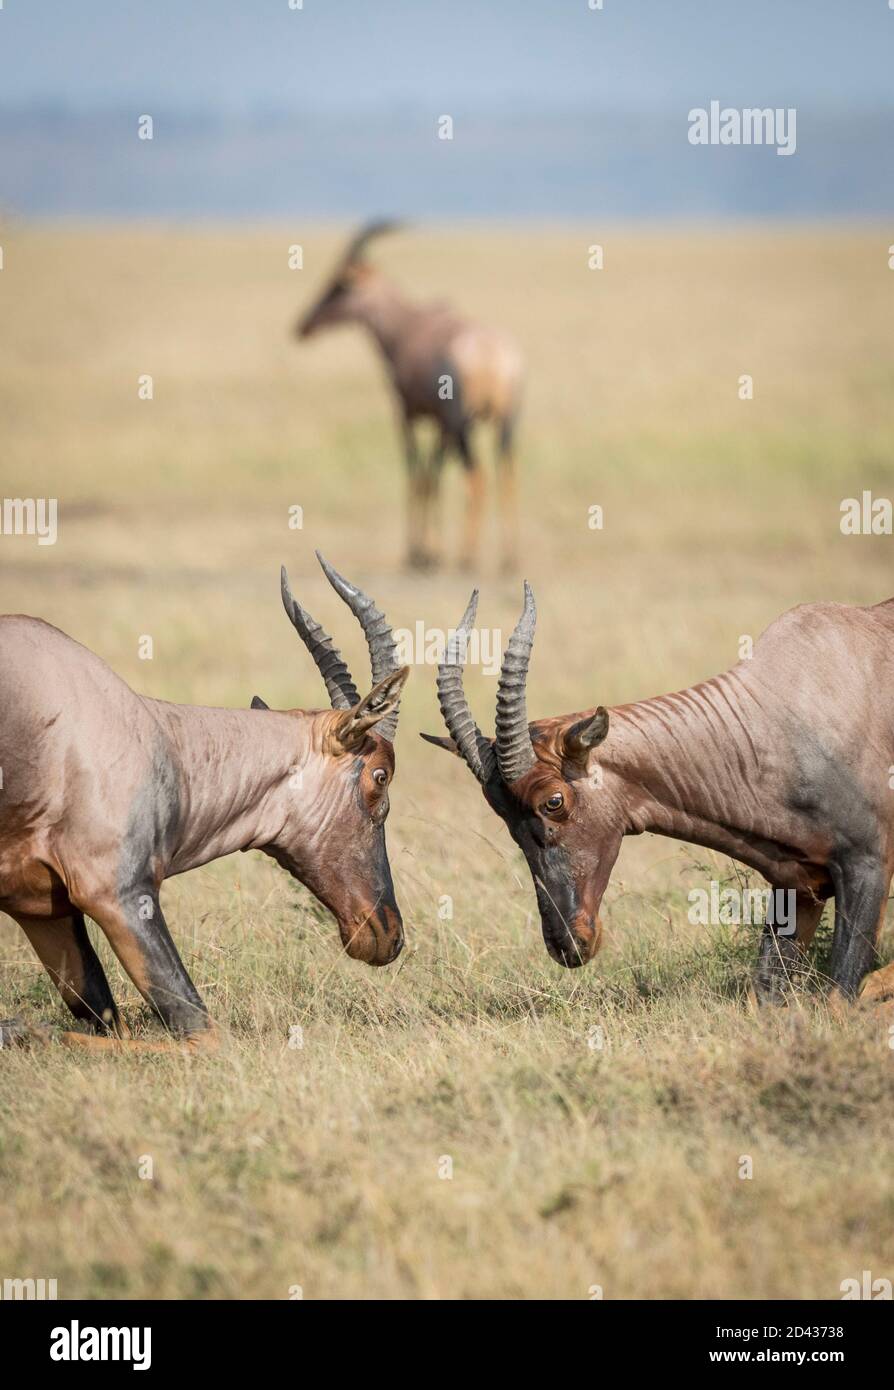 Vertical portrait of two topi antelope fighting in grass plains of Masai Mara in Kenya Stock Photo